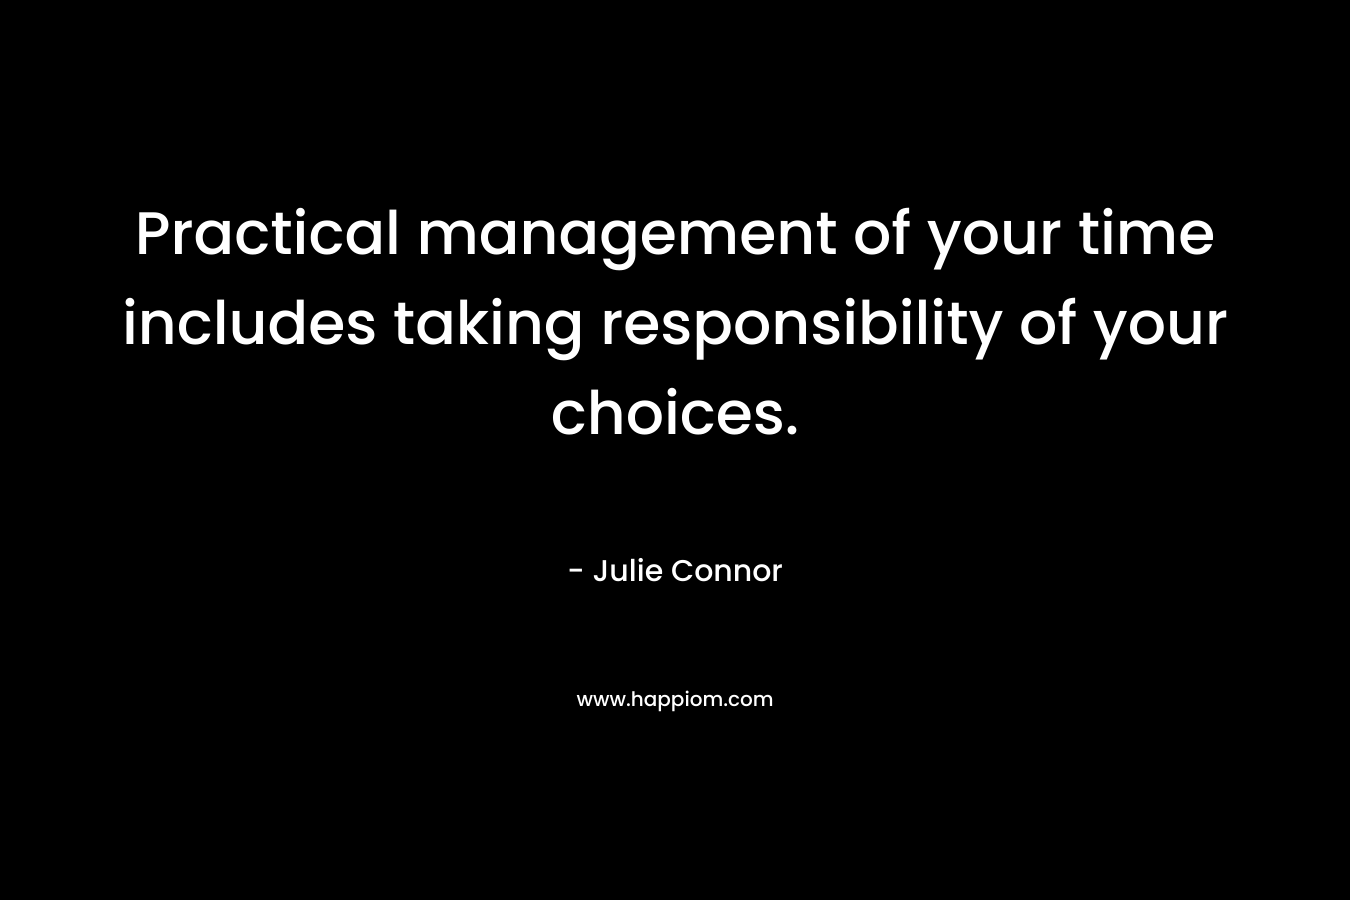 Practical management of your time includes taking responsibility of your choices.